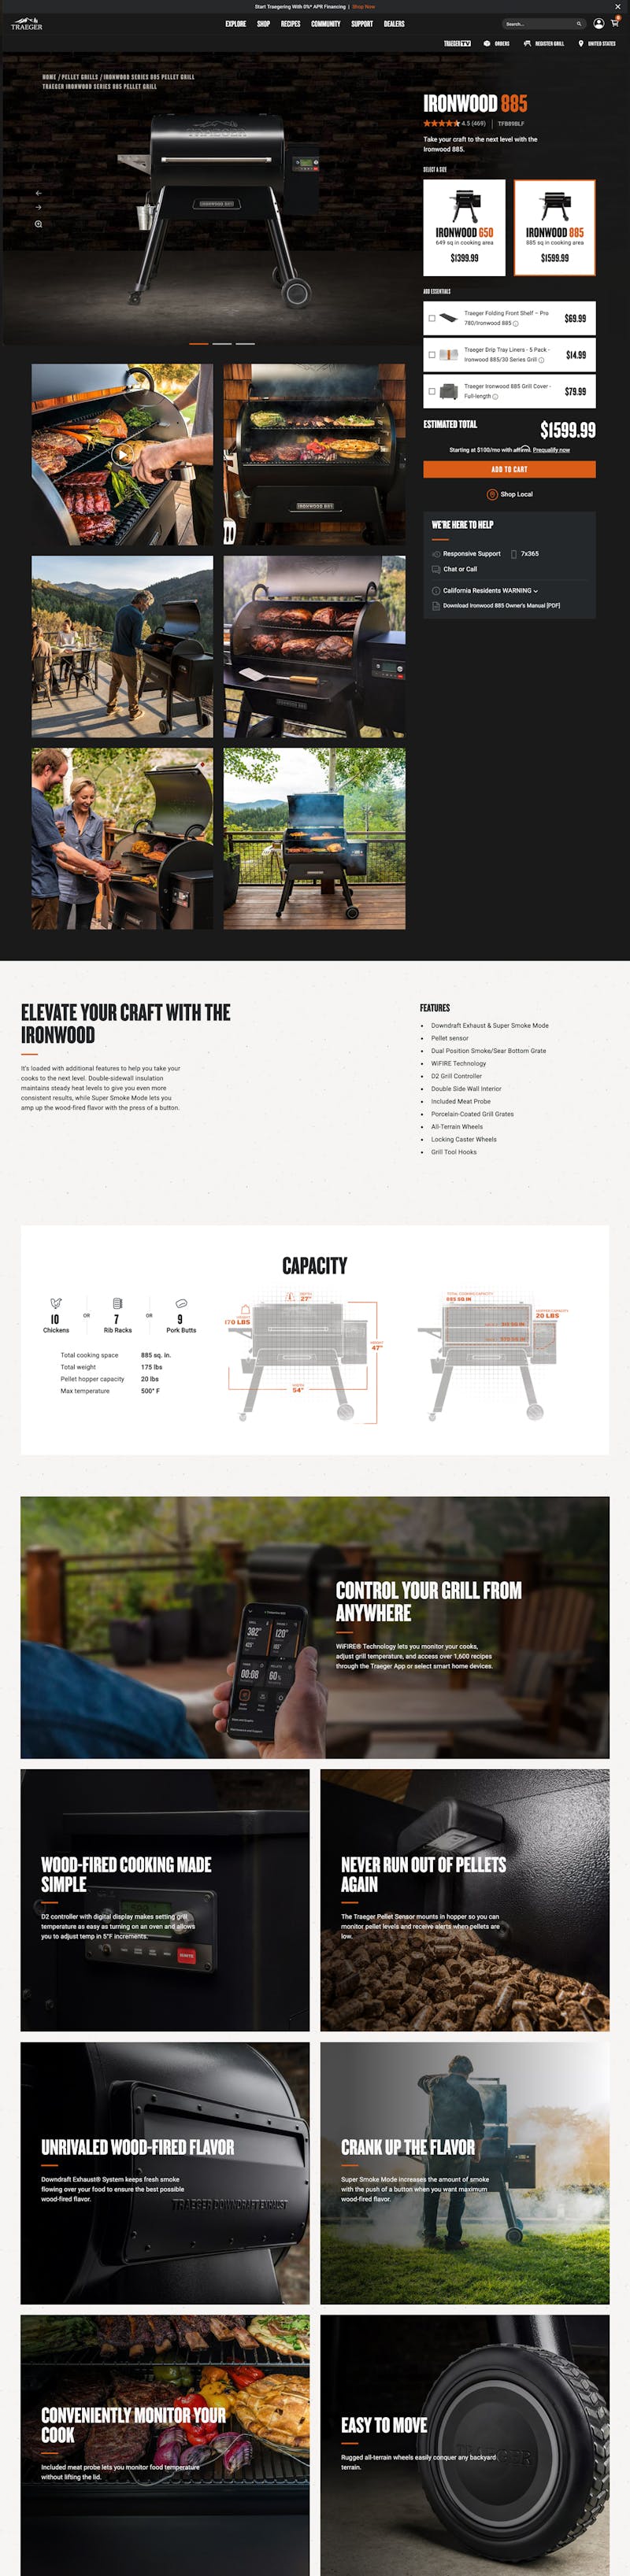 Traeger Product Page